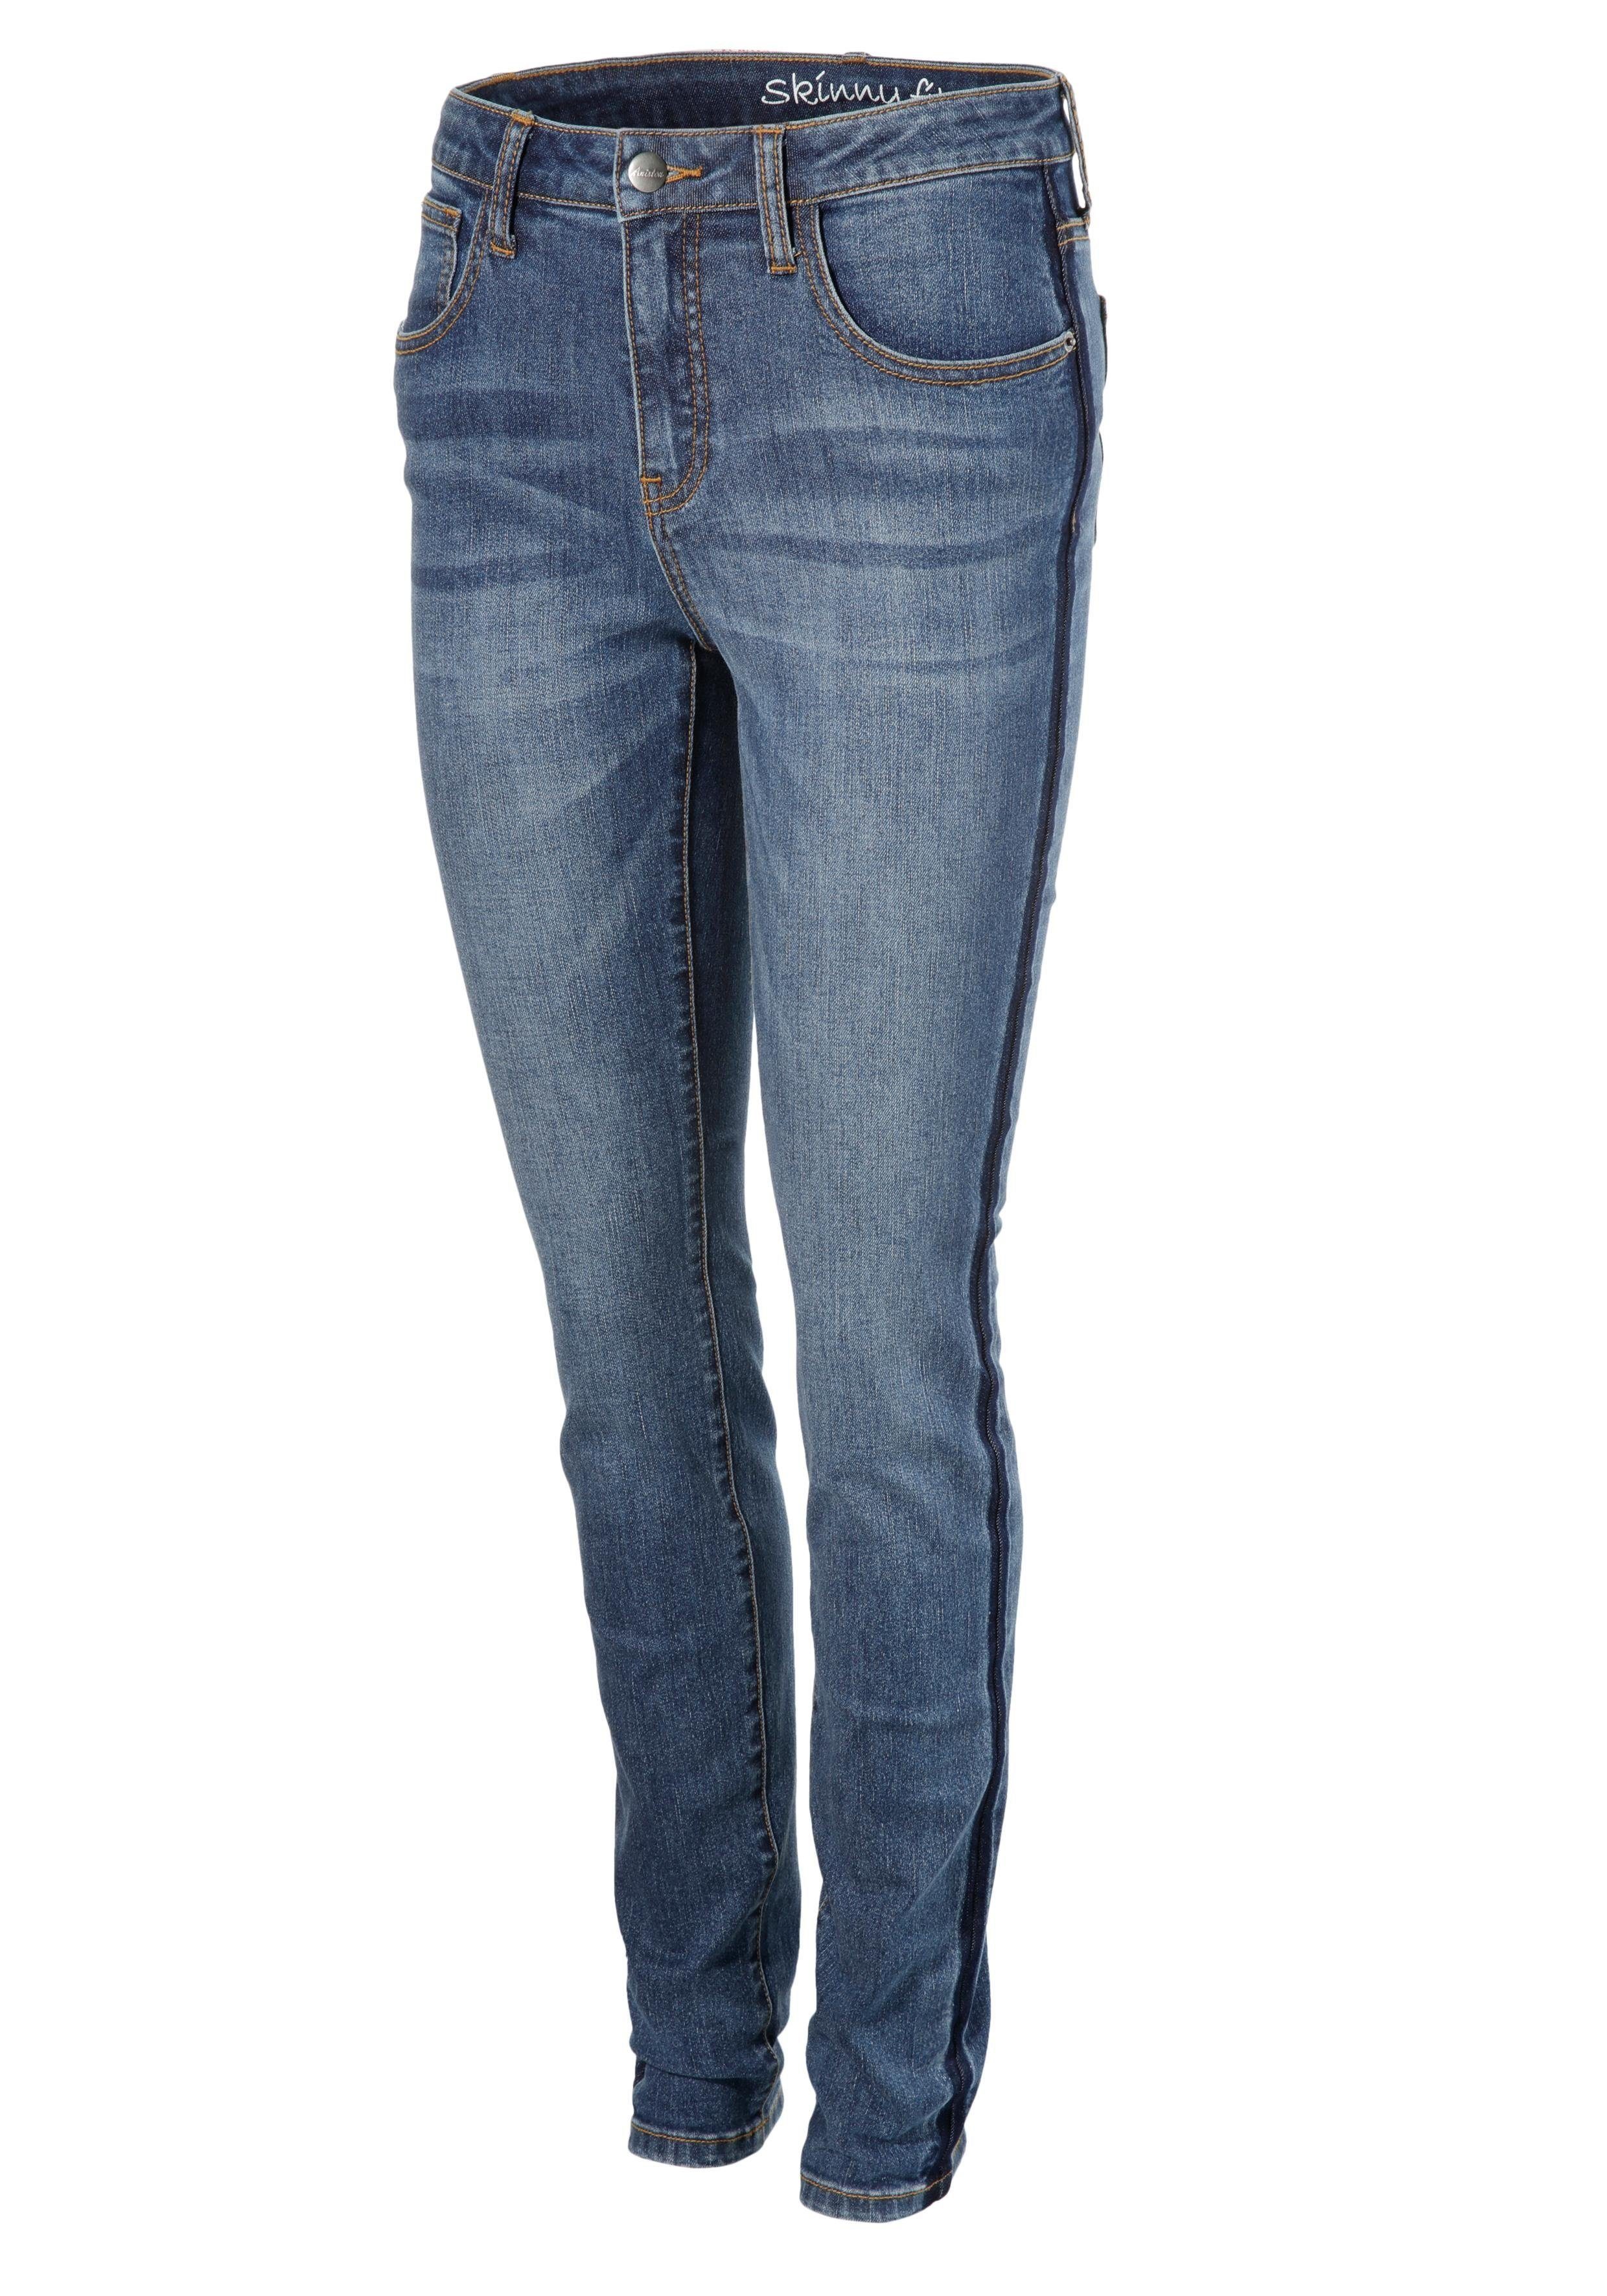 Aniston CASUAL Skinny-fit-Jeans regular waist